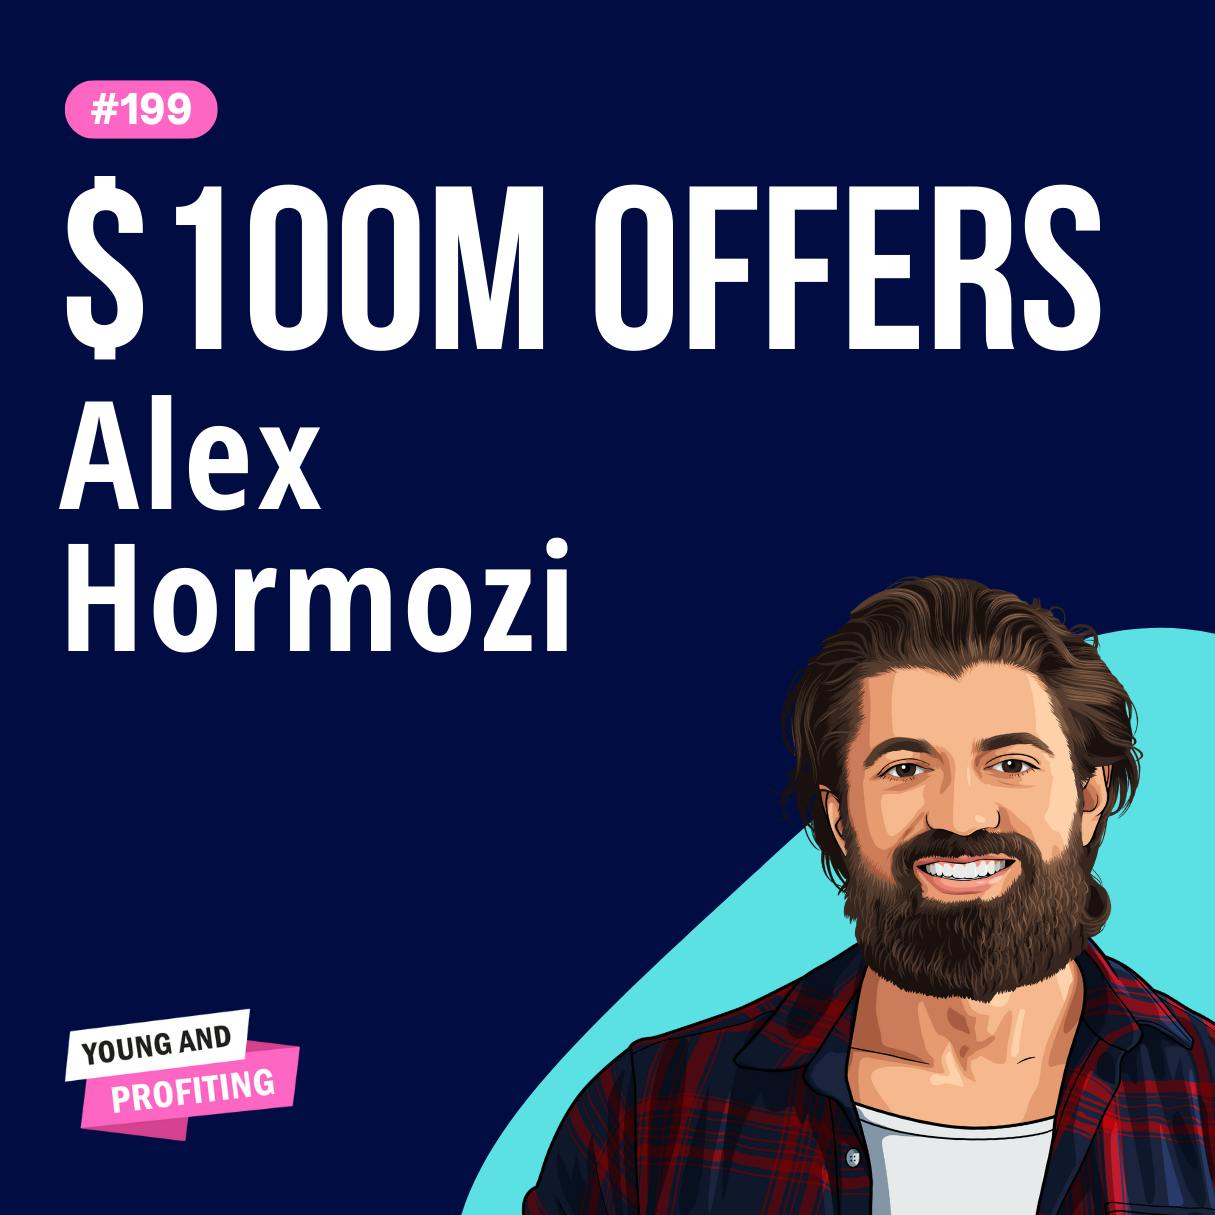 Alex Hormozi: The Value Equation, How To Make Offers So Good People Feel Stupid Saying No | E199 by Hala Taha | YAP Media Network